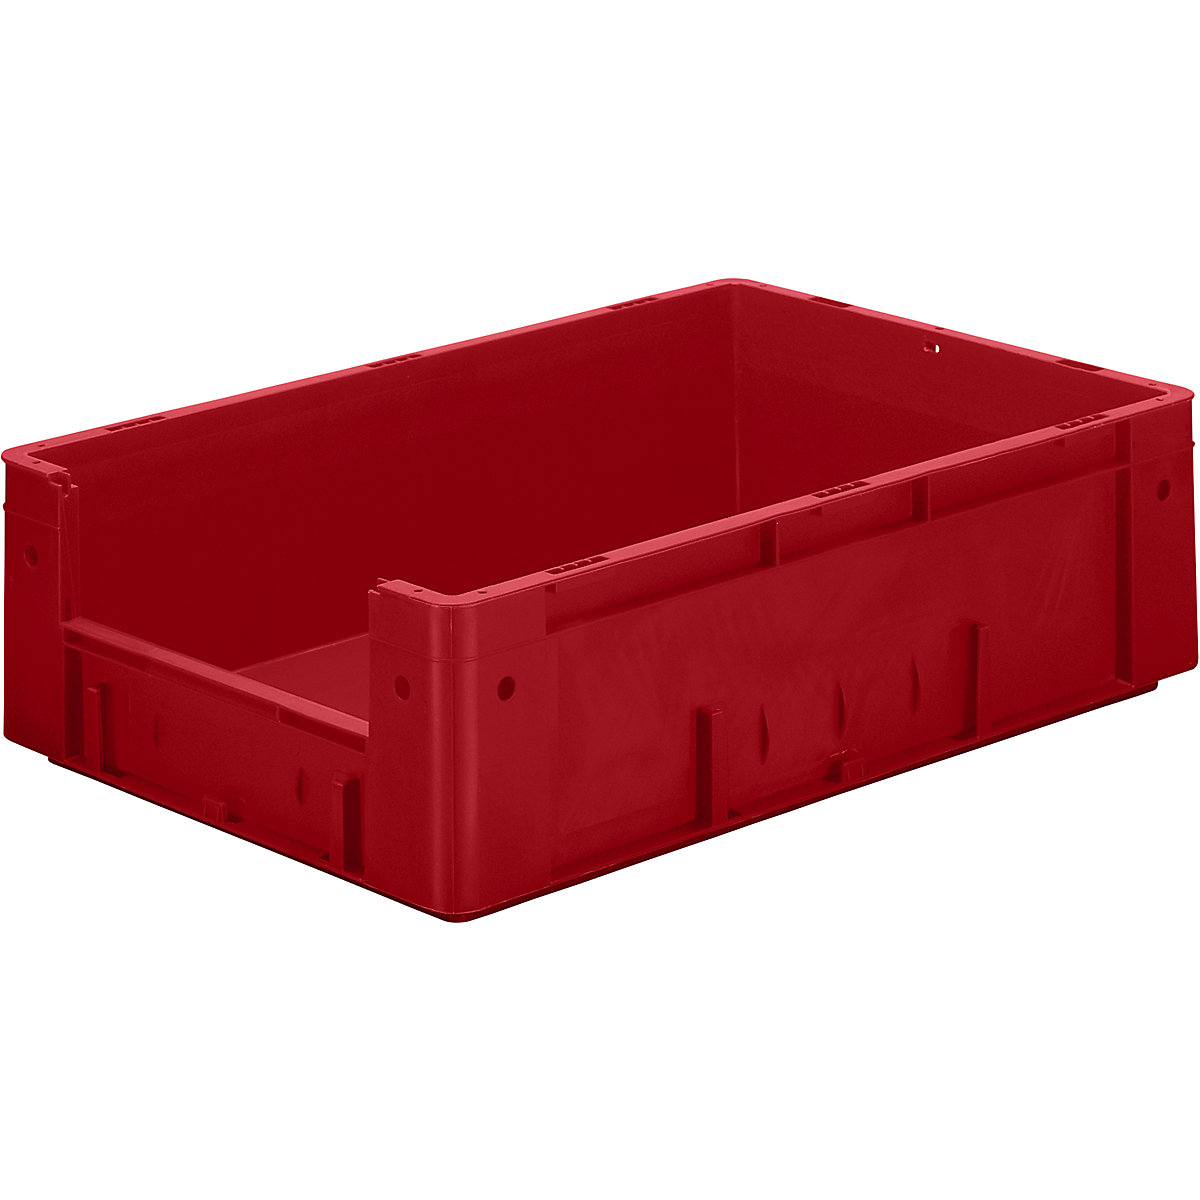 Euro stacking container, capacity 31 l, LxWxH 600 x 400 x 175 mm, pack of 2, red-6